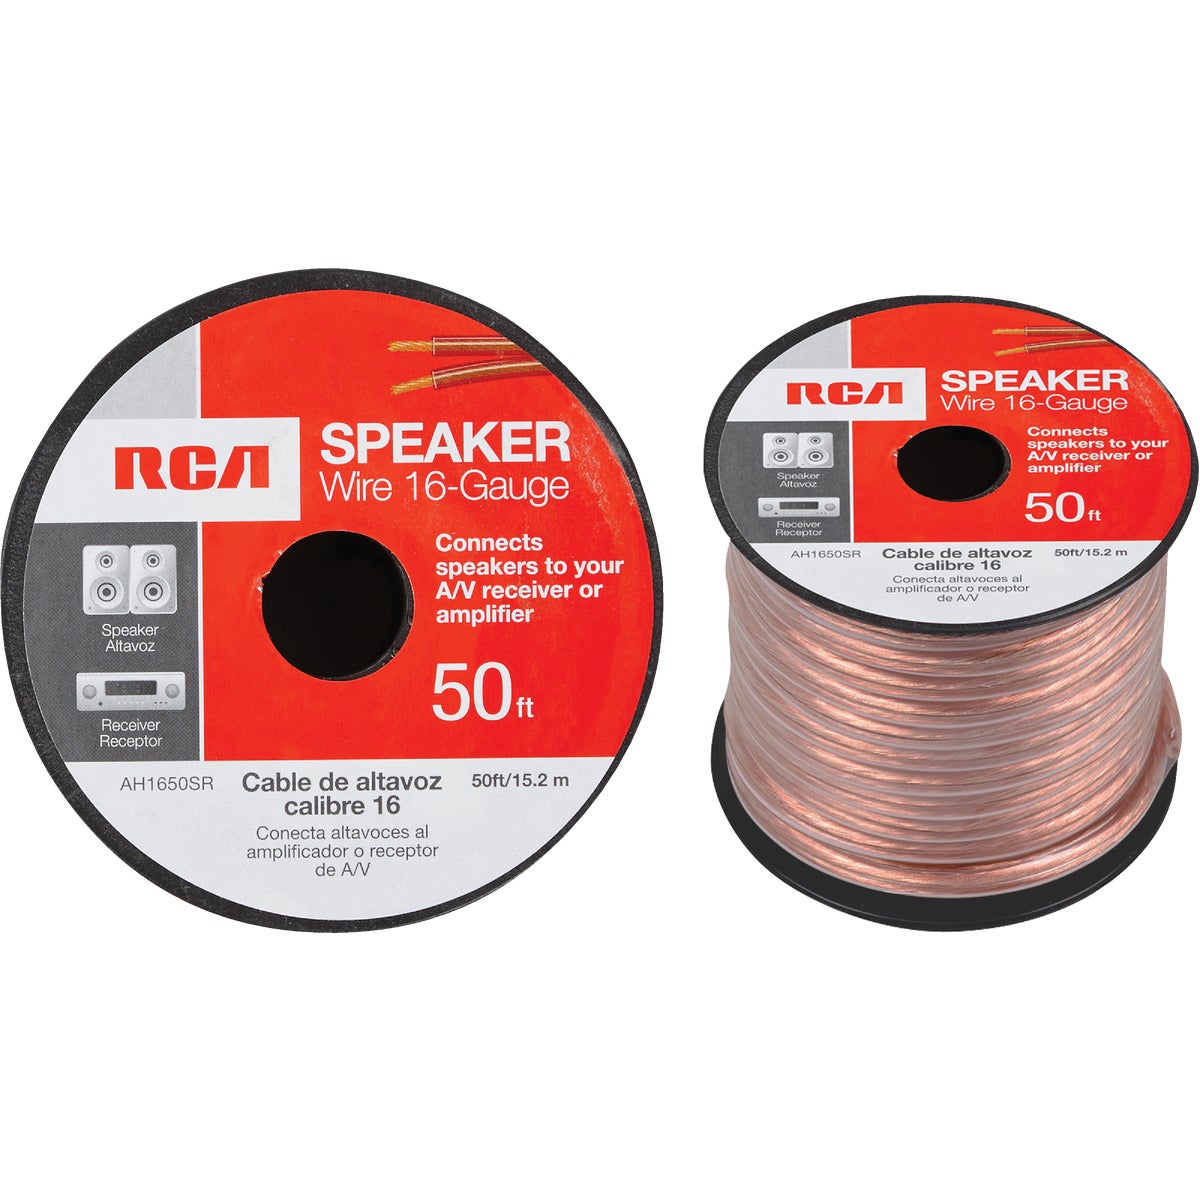 Item 539805, 16-gauge speaker wire ideal for connecting speakers to amplifiers or 